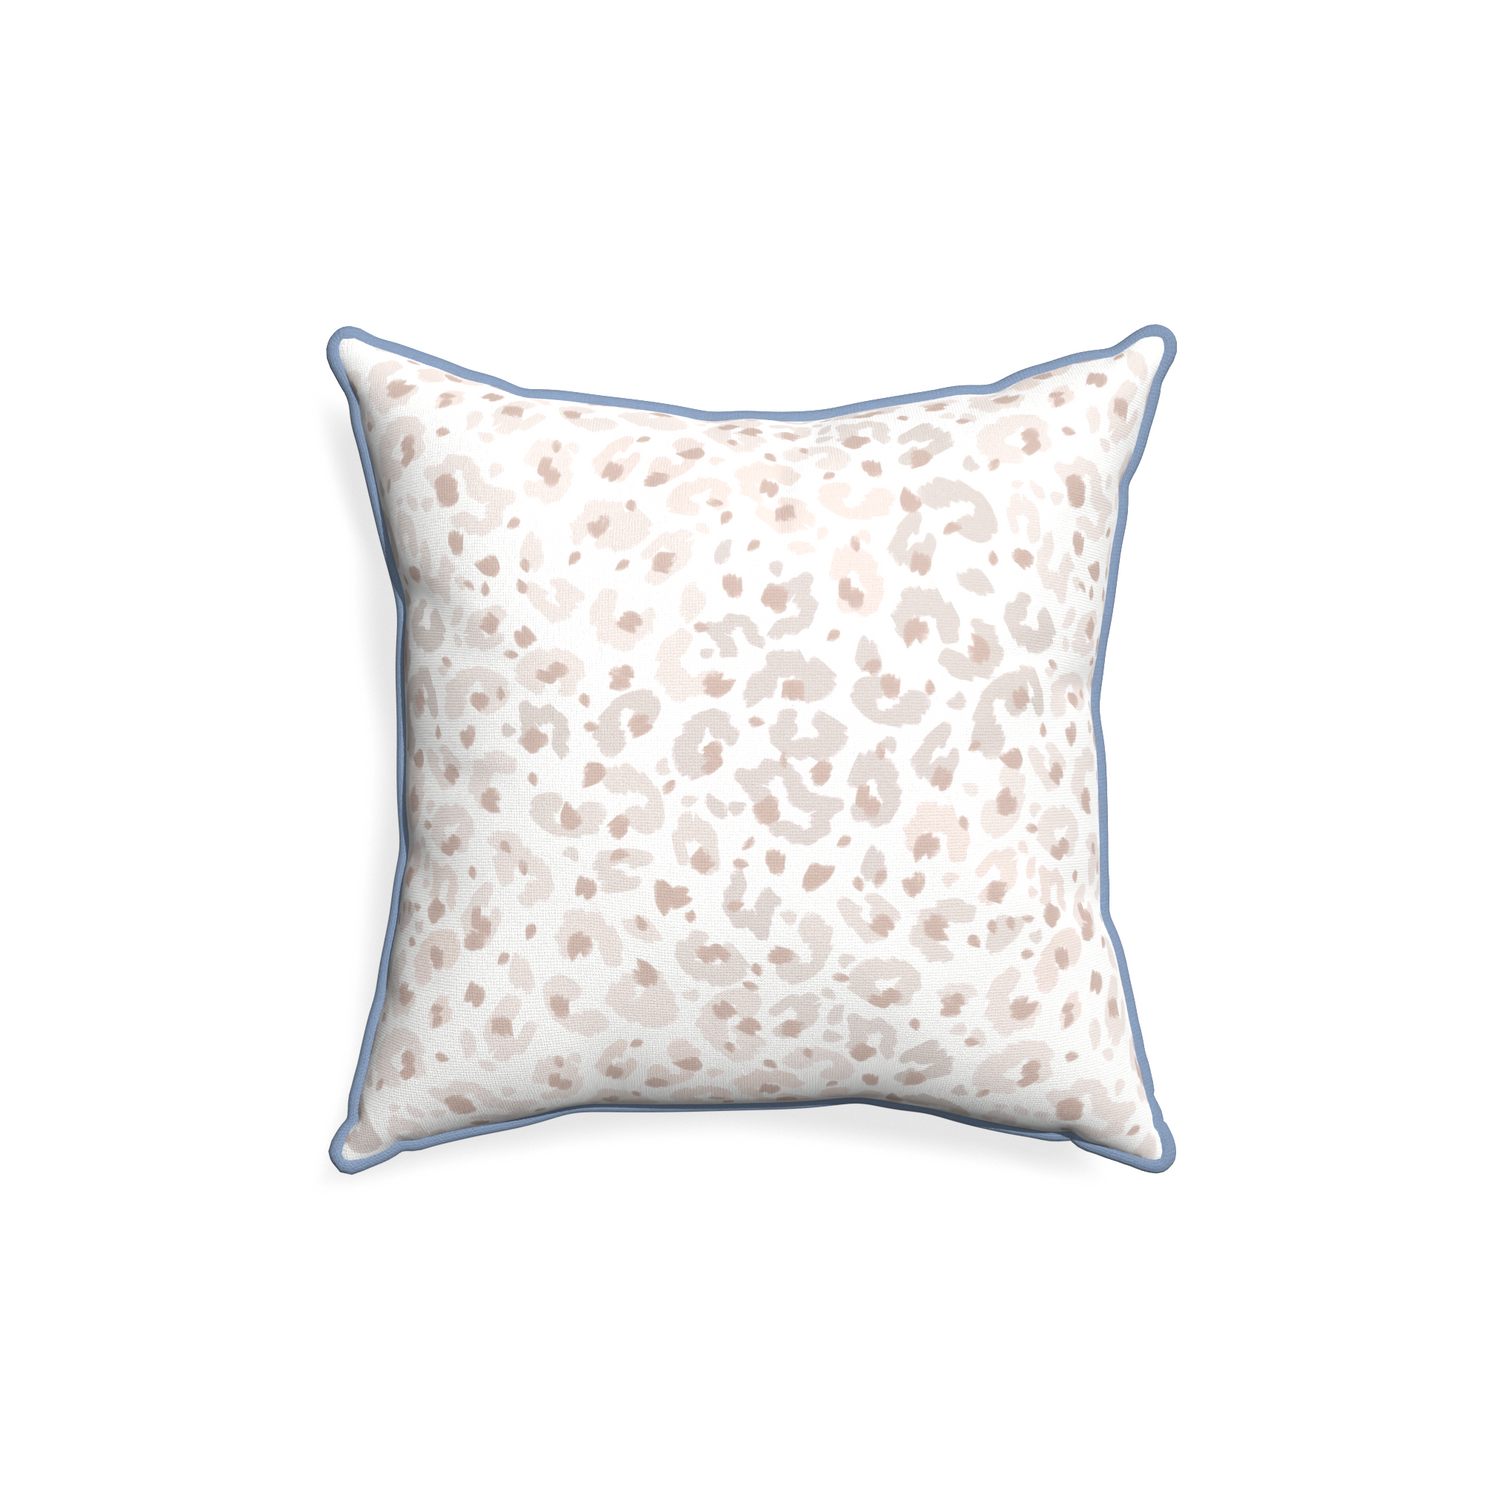 18-square rosie custom pillow with sky piping on white background